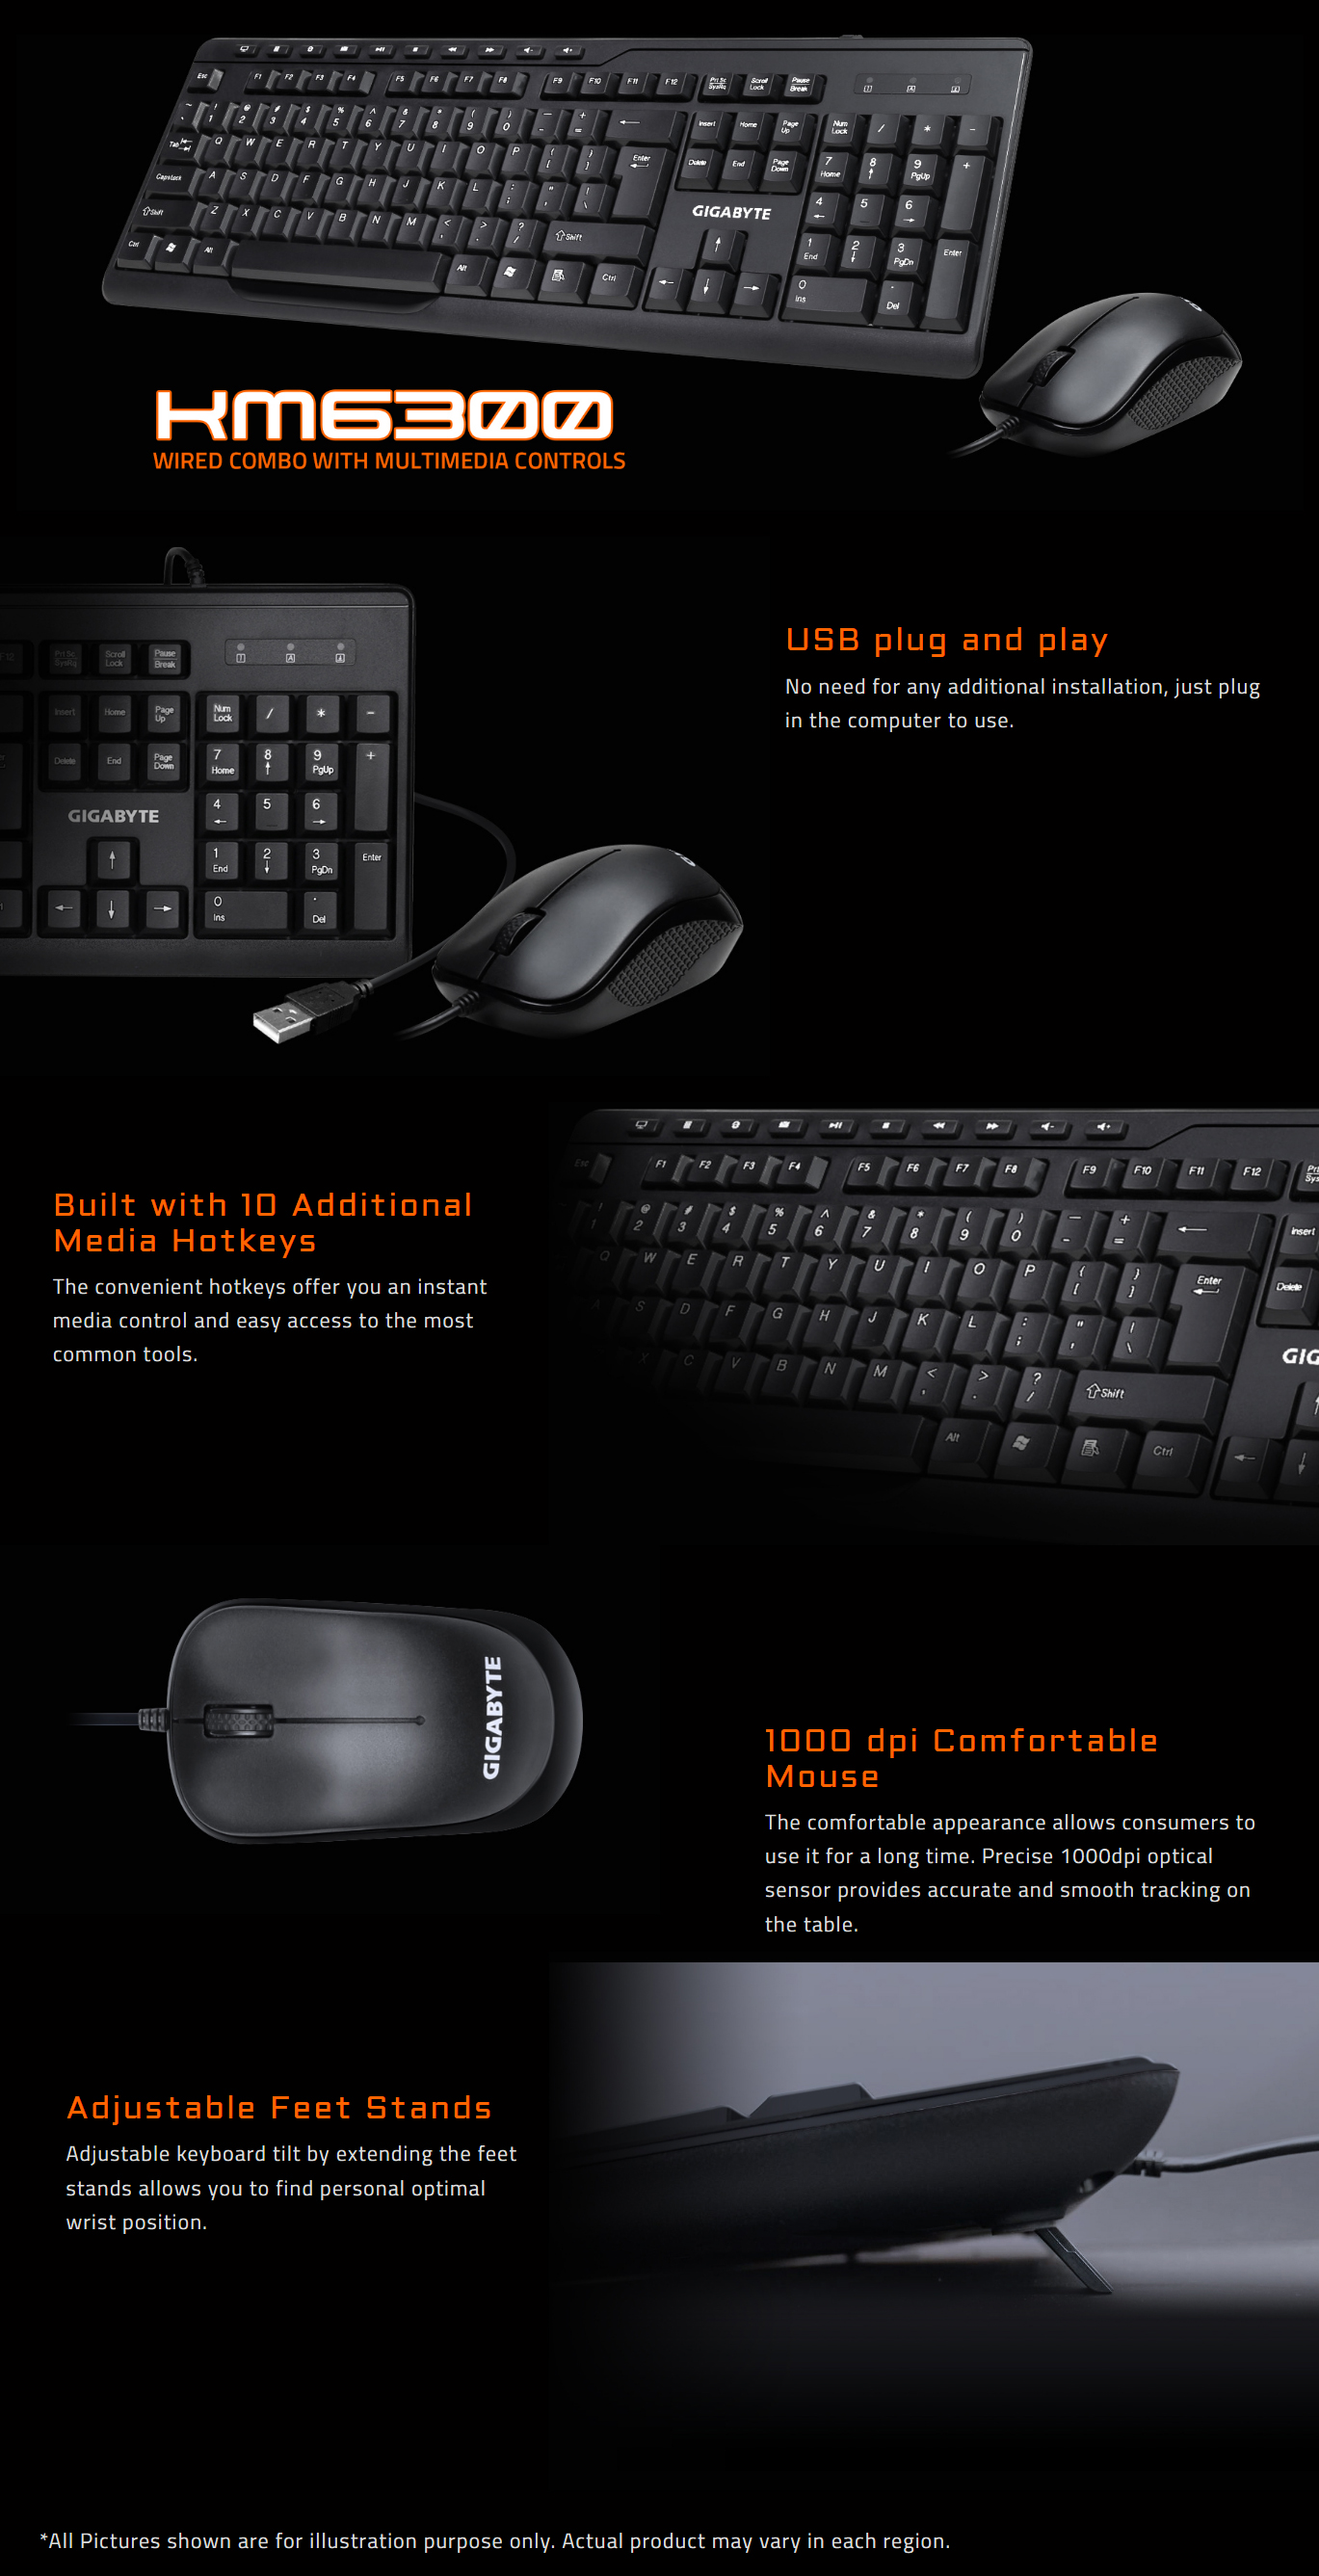 Keyboard-Mouse-Combos-Gigabyte-KM6300-USB-Wired-Keyboard-and-Mouse-Combo-4